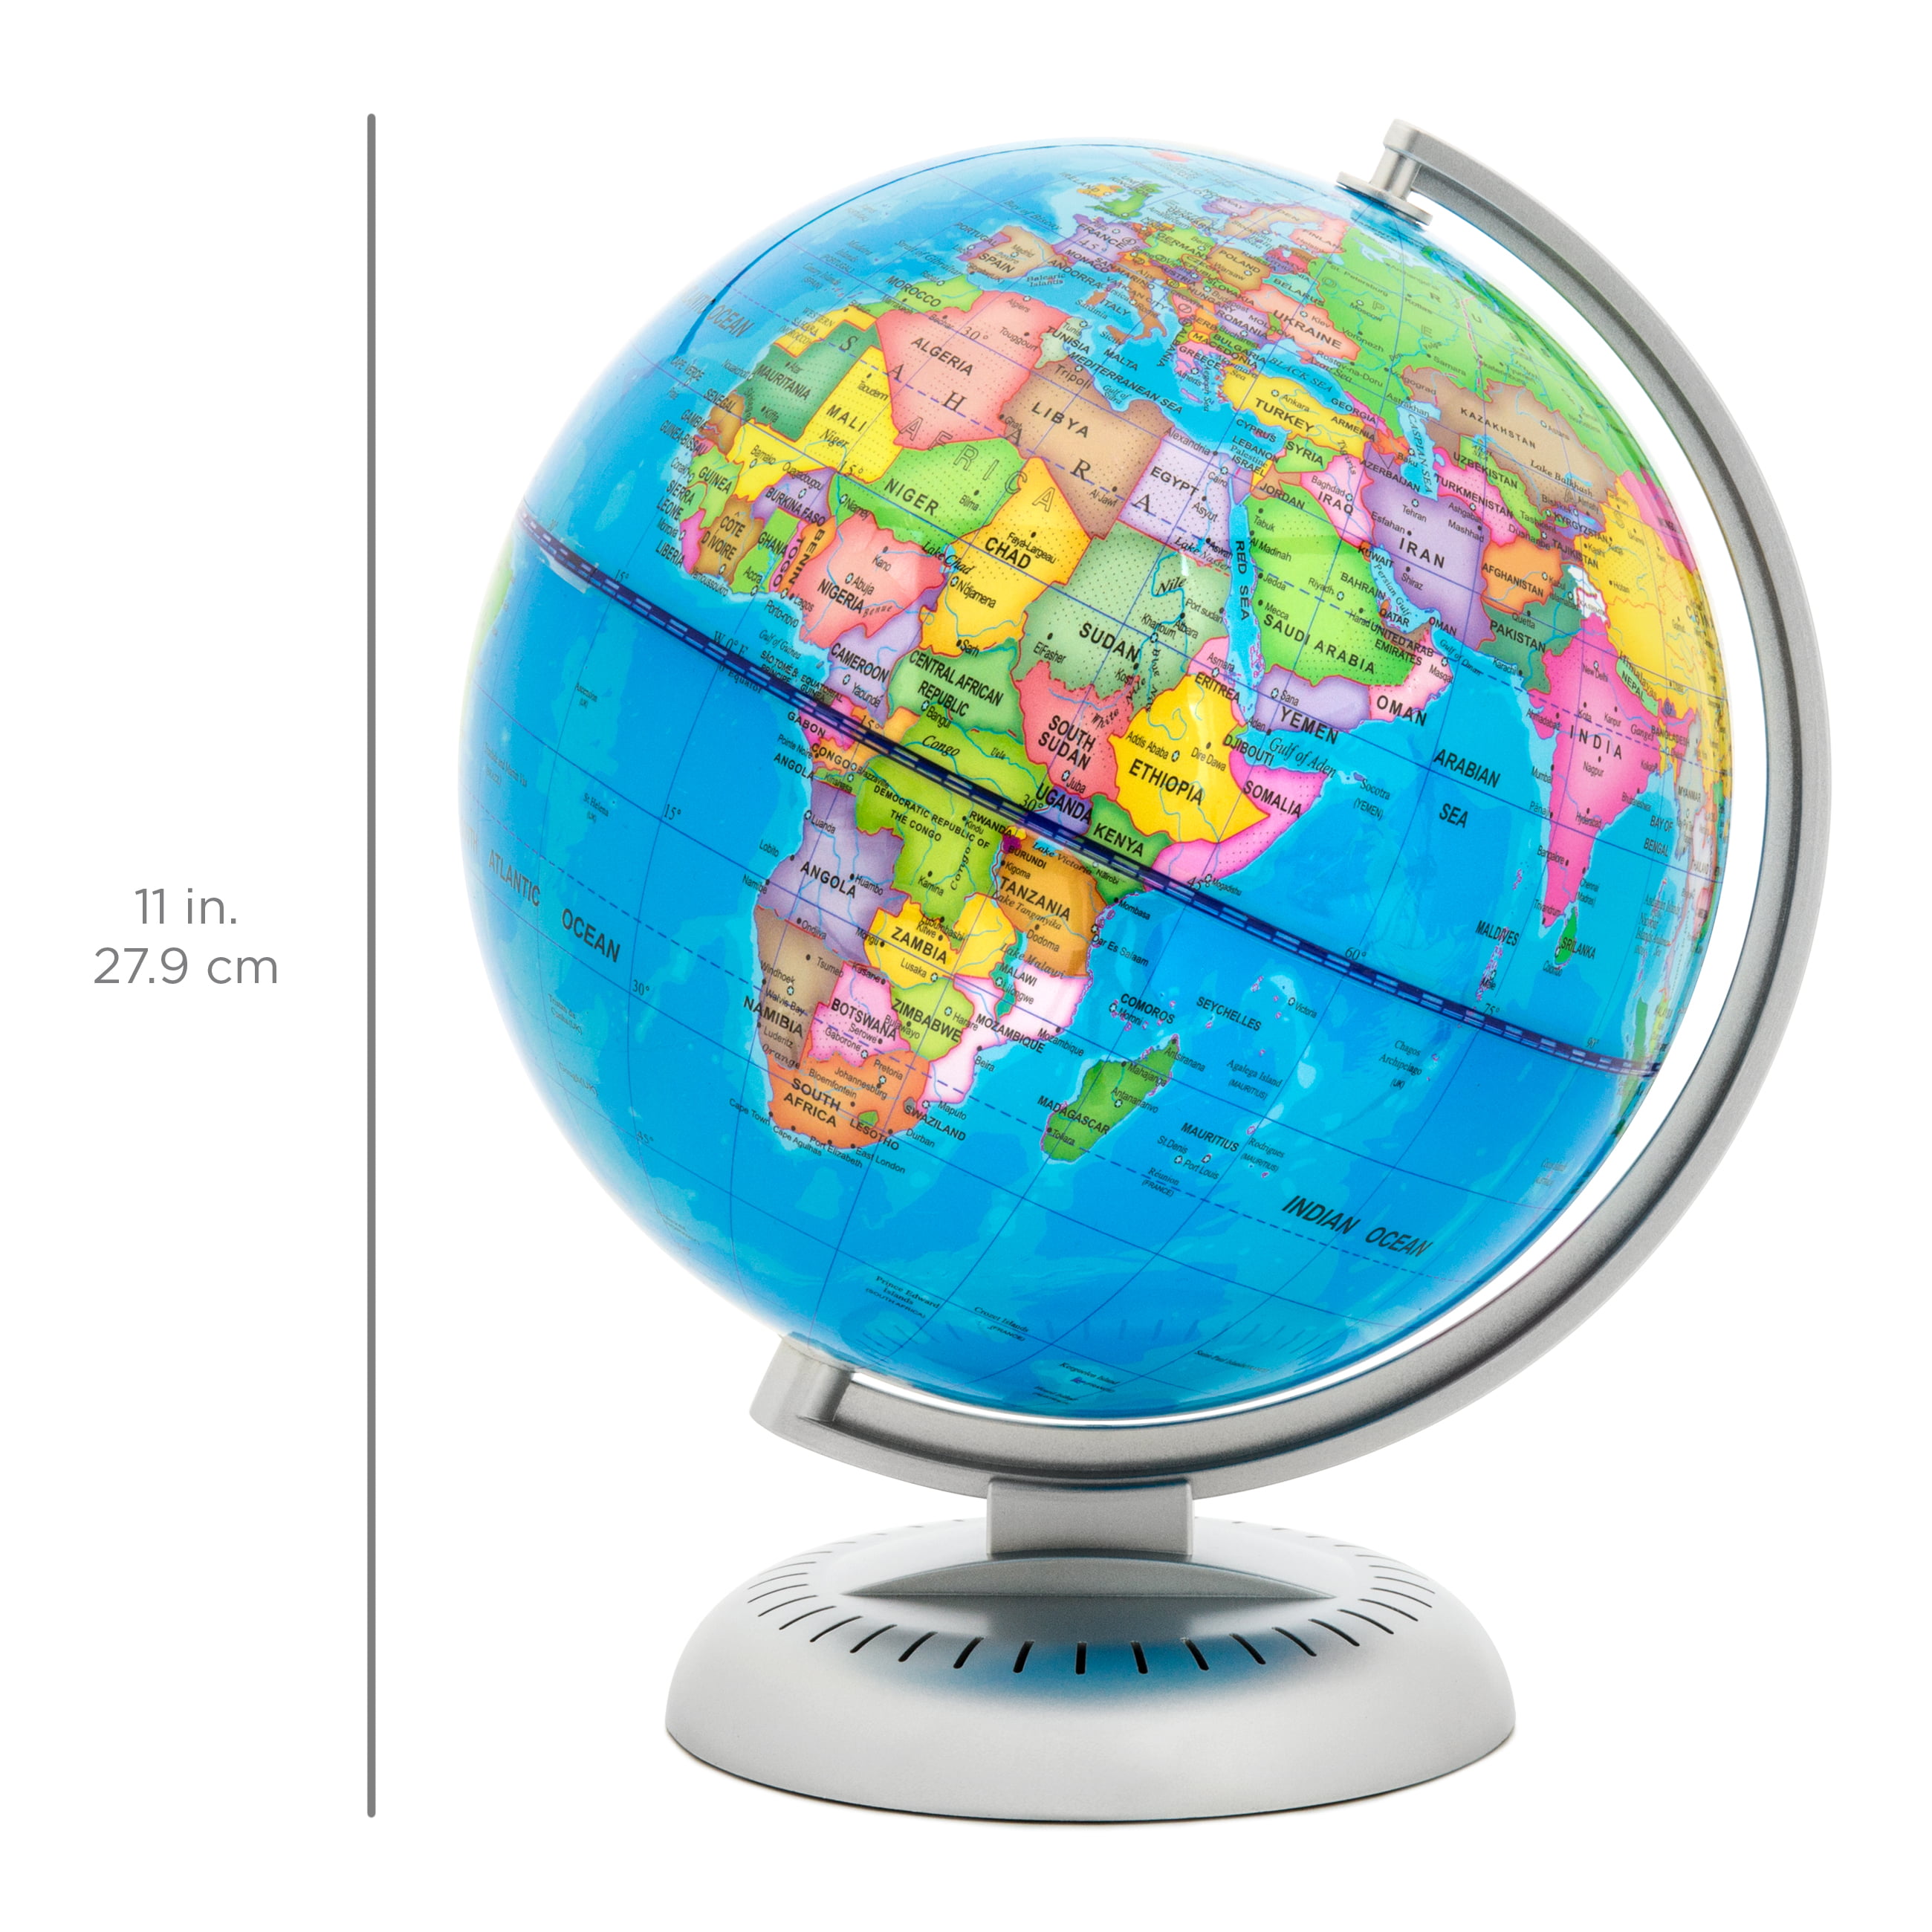 XHJZ-W 12.6 Inch Illuminated World Globe for Kids with Stand Capitals Countries Built-In LED Light Illuminates for Night View Easy-Read Labels of Continents Colorful 